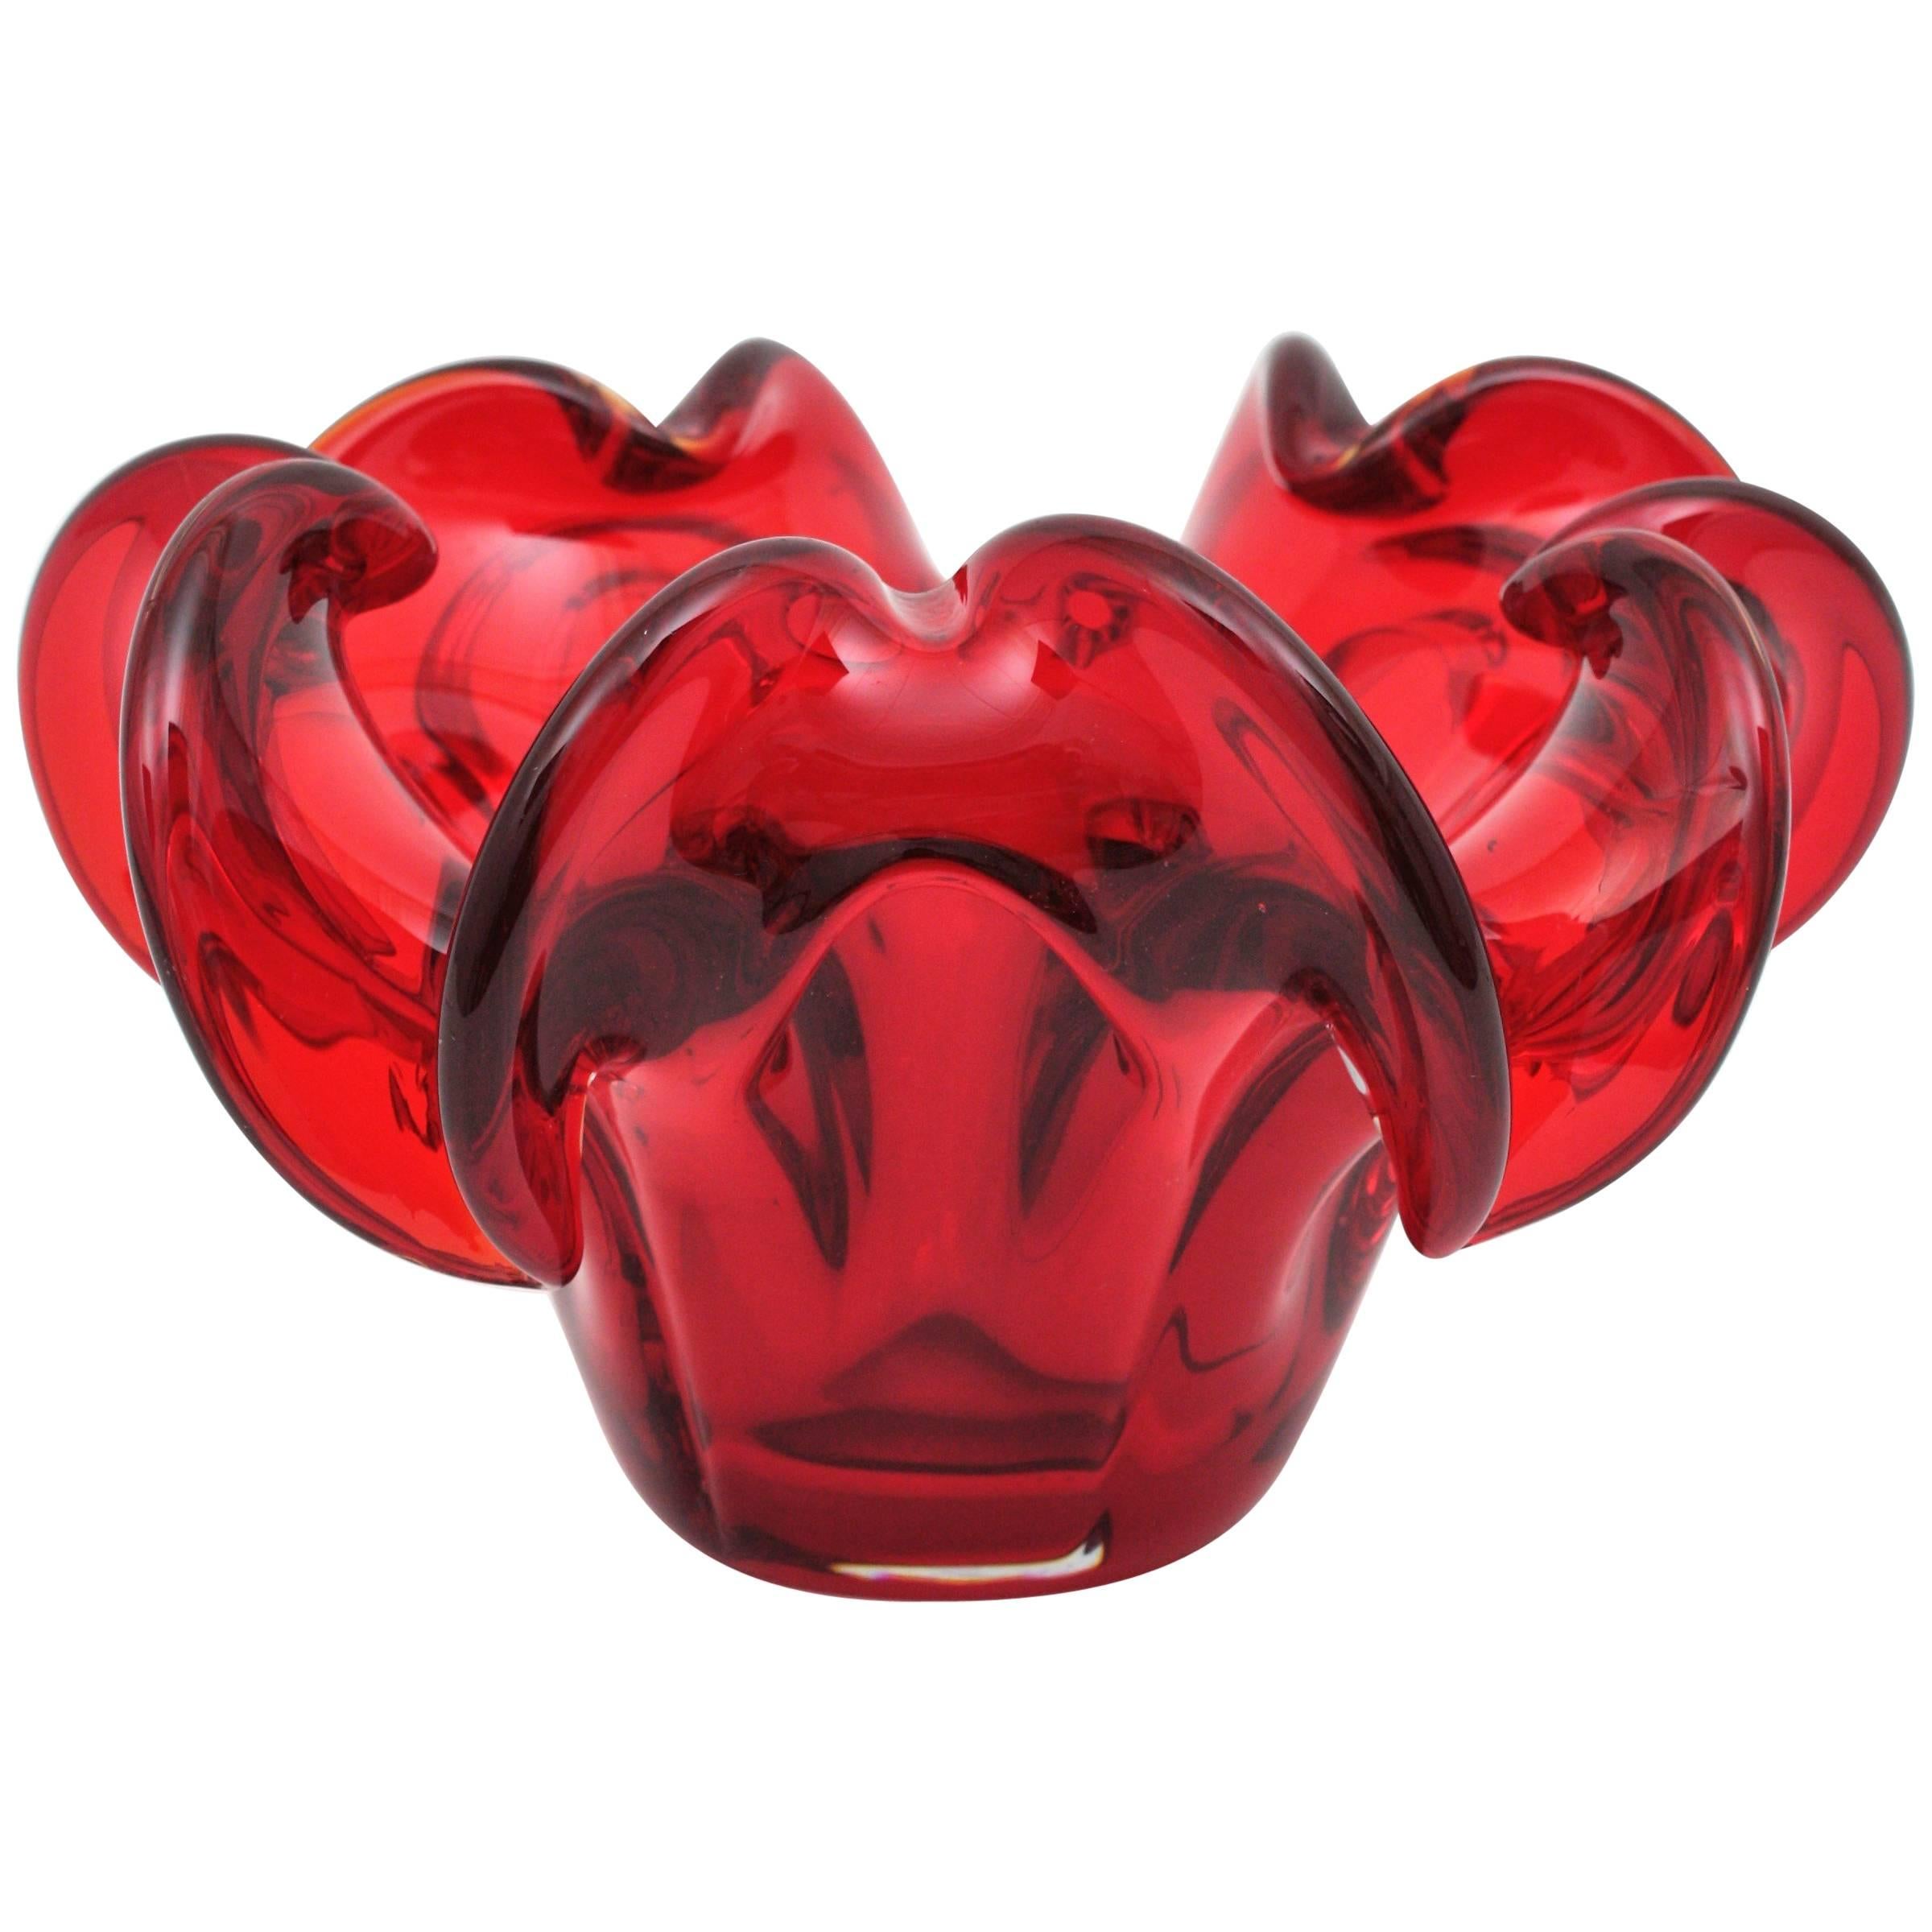 Large hand blown Murano ruby red glass flower centerpiece or bowl. Attributed to Archimede Seguso, Italy, 1950s.
This eye-catching bowl is made of hand blown red glass cased into clear glass using the Sommerso technique.
Lovely to be used as